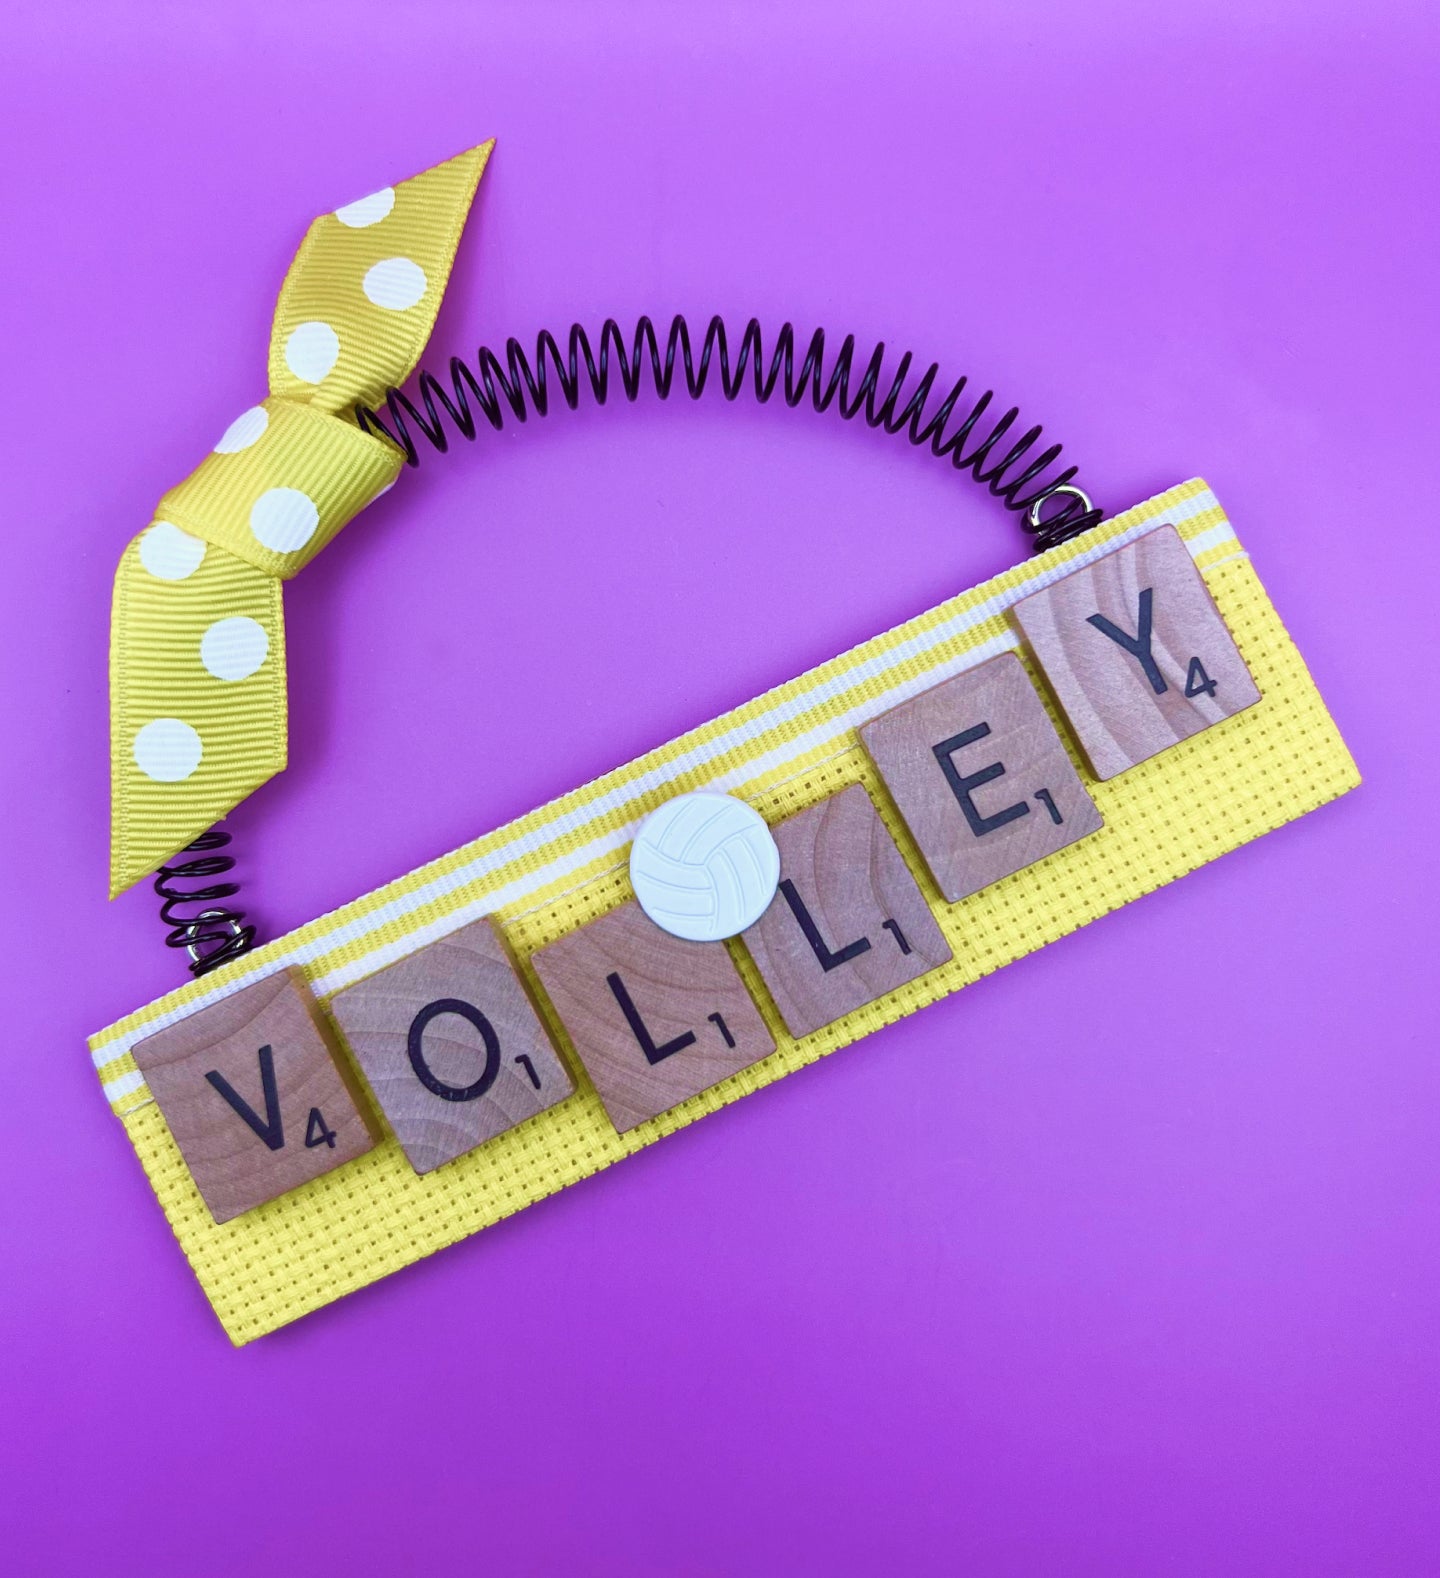 Volleyball Christmas Ornament - Scrabble